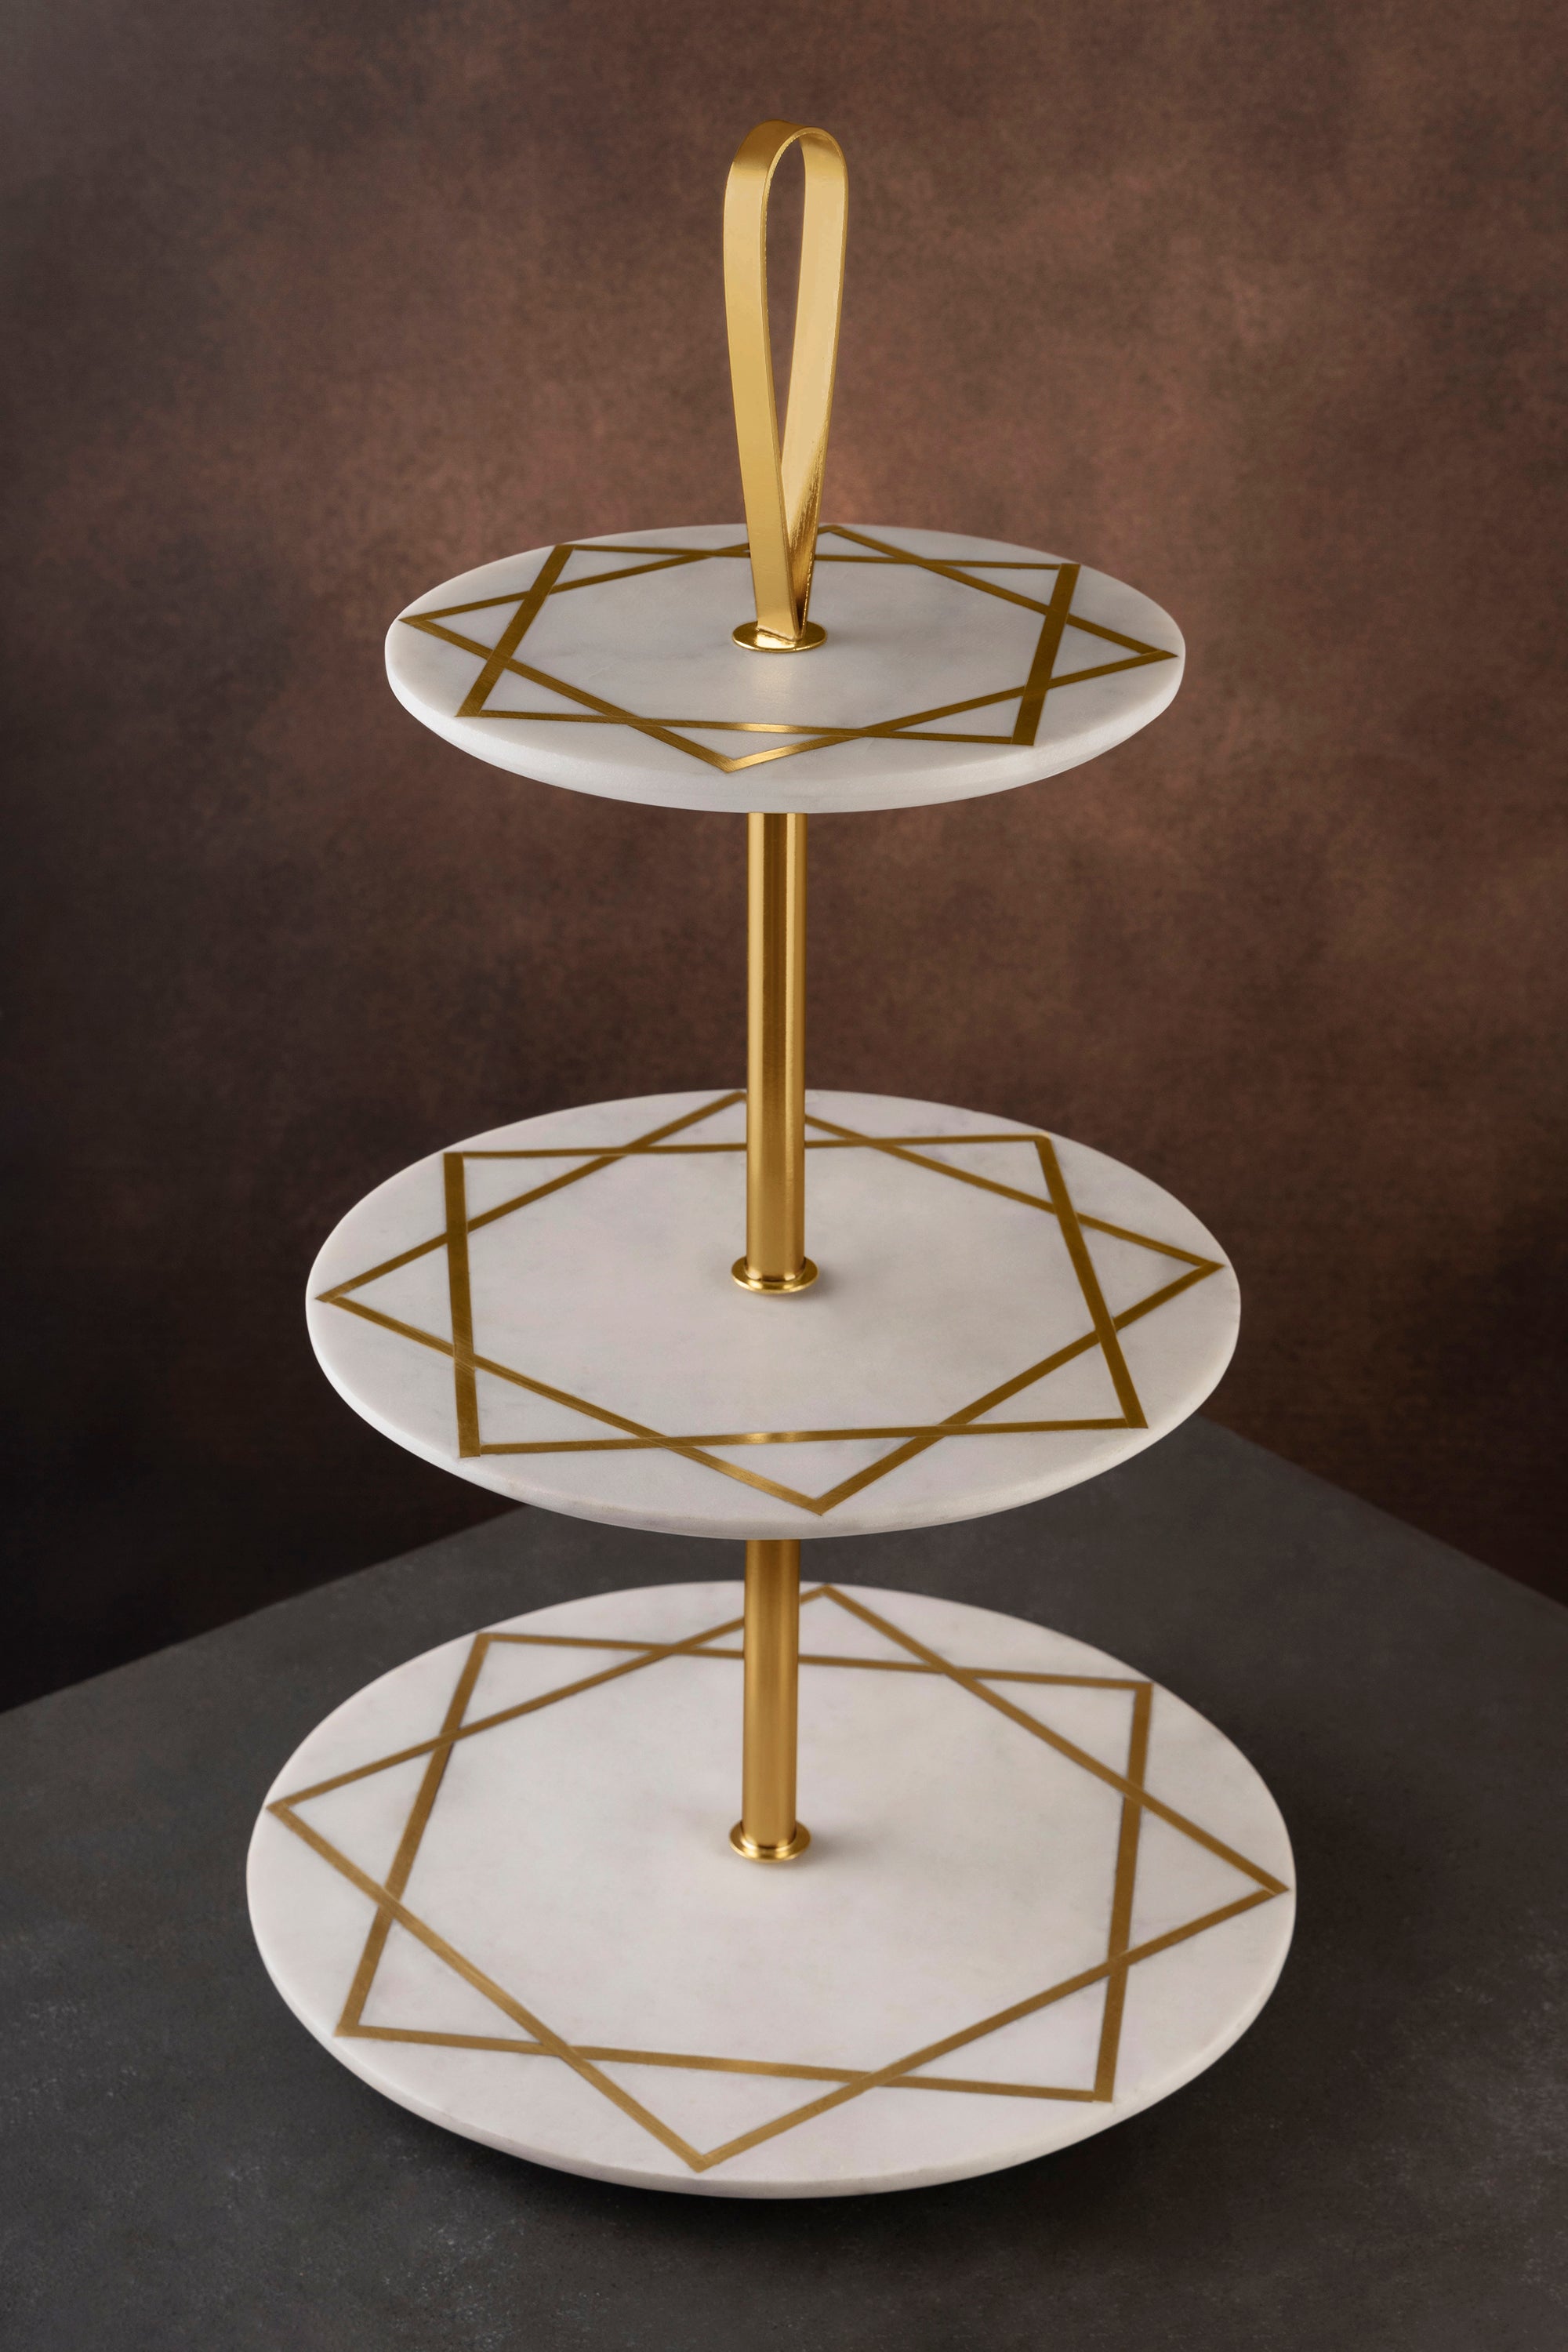 https://cdn.shopify.com/s/files/1/0043/0800/9030/products/GK51110-2-GAURI-KOHLI-White-Marble-3-Tiered-Dessert-and-Cake-Stand-Large.jpg?v=1671012919&width=2000